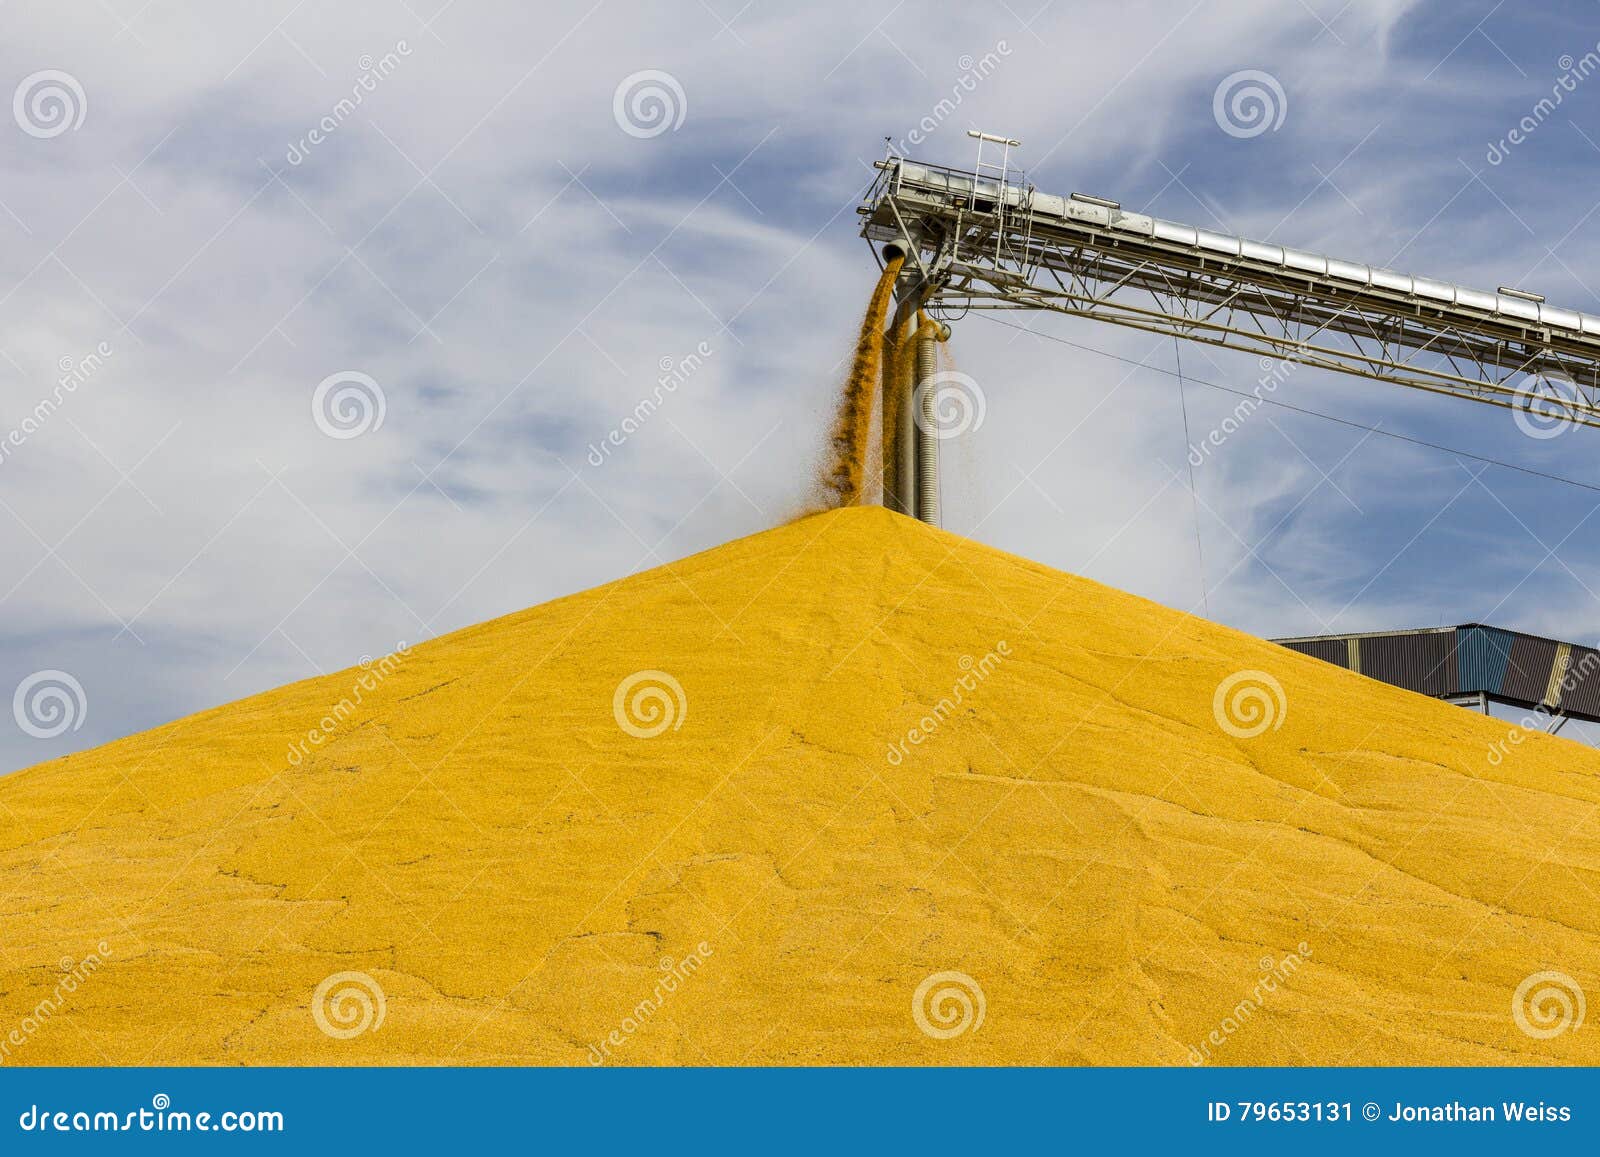 corn and grain handling or harvesting terminal. corn can be used for food, feed or ethanol iii